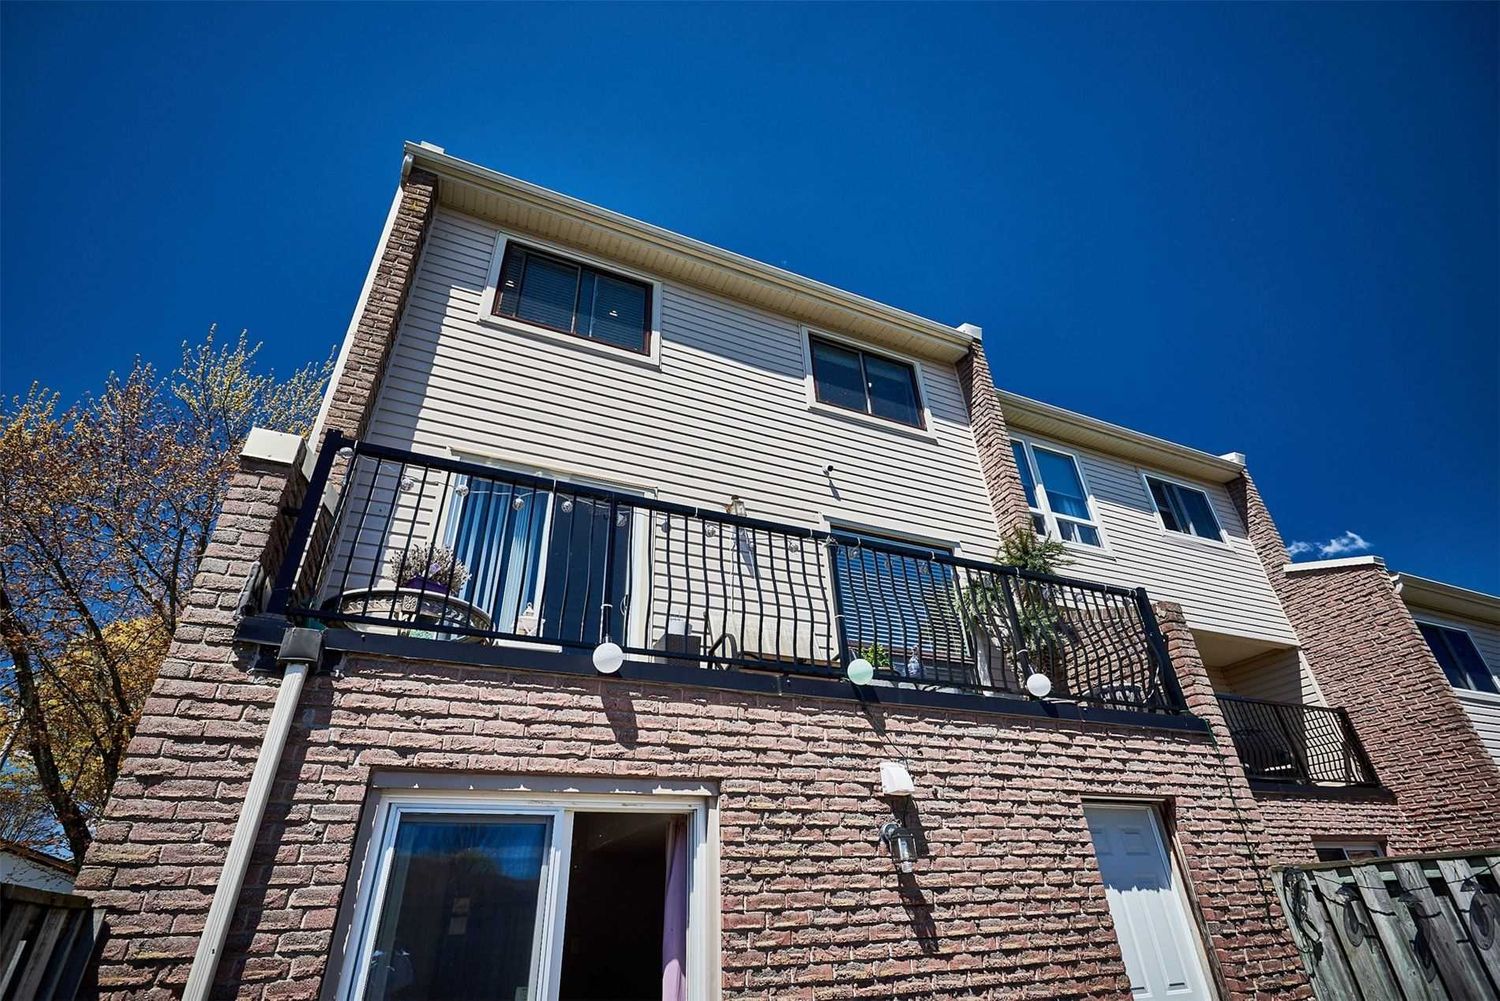 1-59 Clover Ridge Drive W. Clover Ridge Drive Townhomes is located in  Ajax, Toronto - image #2 of 3